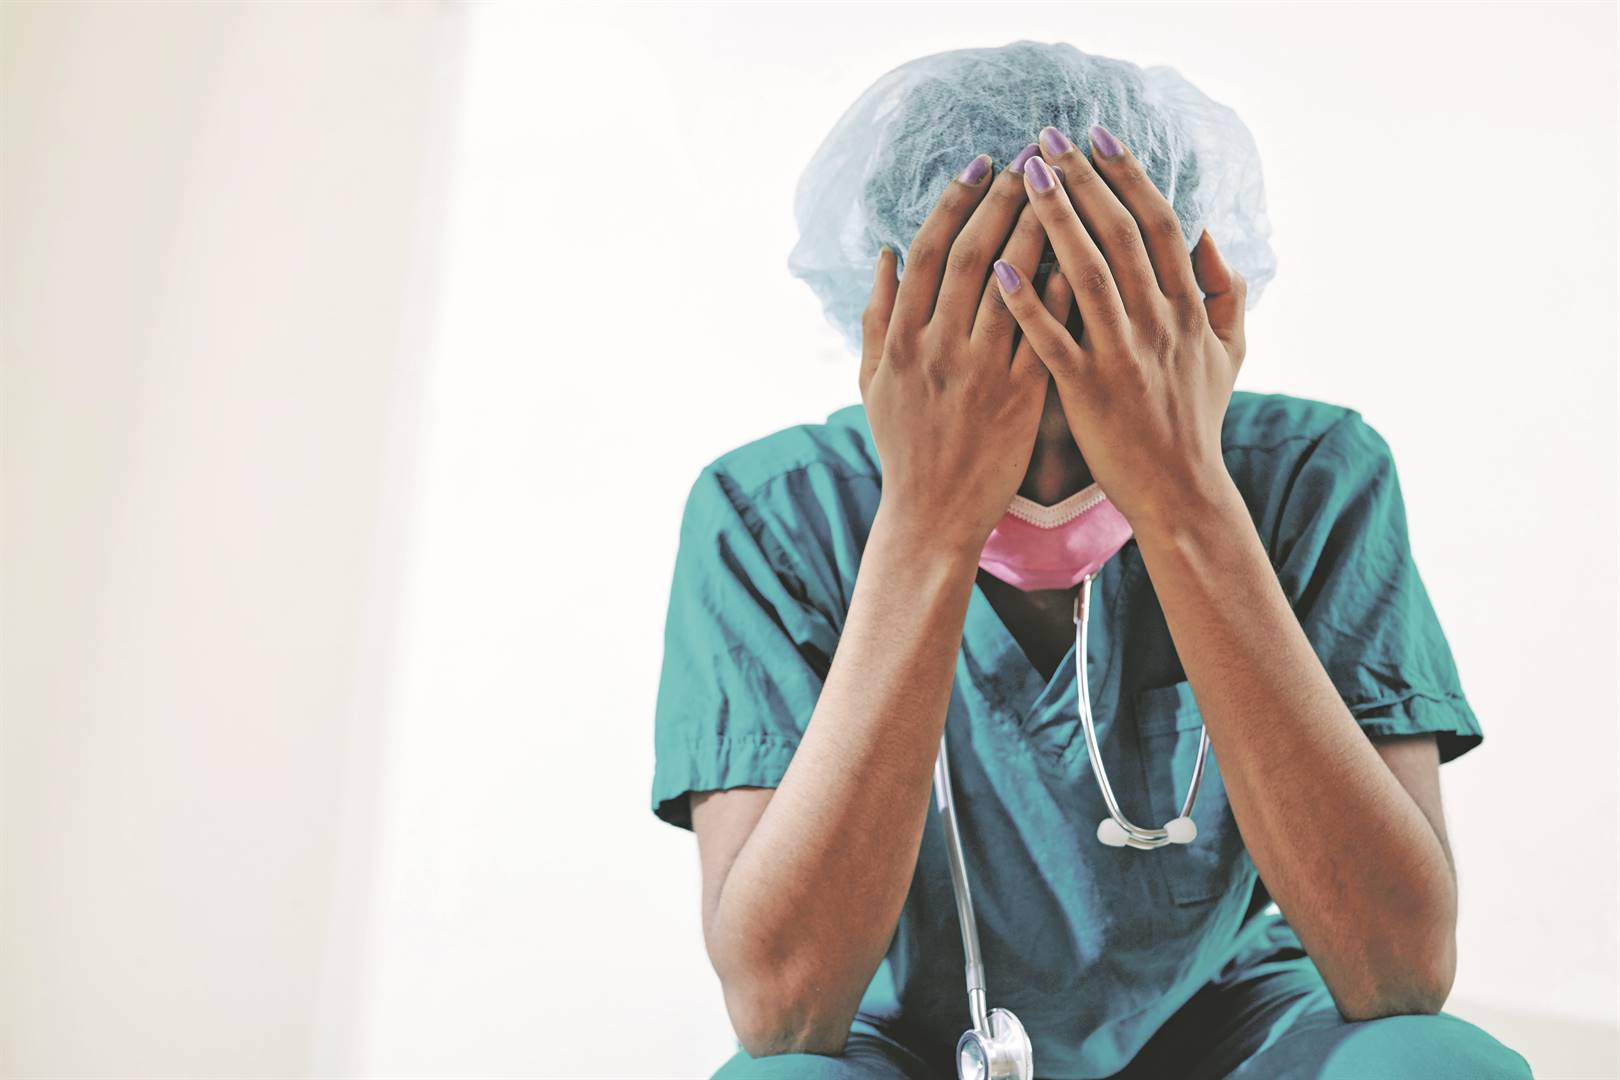  Democratic Nursing Organisation of SA (Denosa) said the shortage of nurses in South Africa puts a strain on the public health system. Photo: Dragon Images